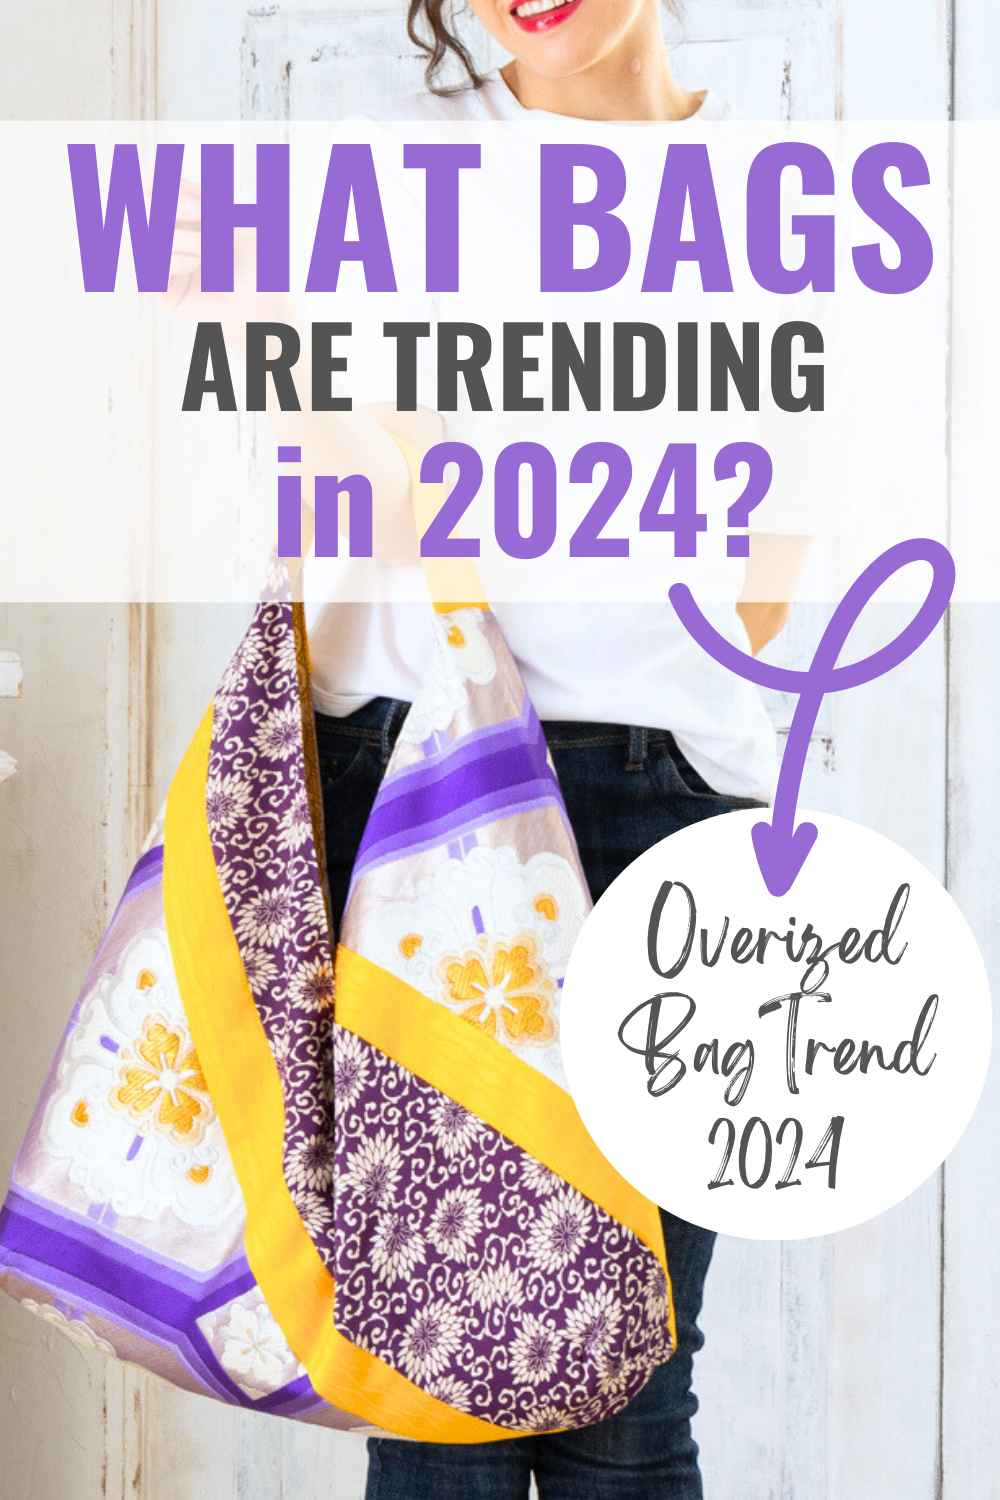 Oversized bag: What bags are trending in 2024? Big Bag Trend